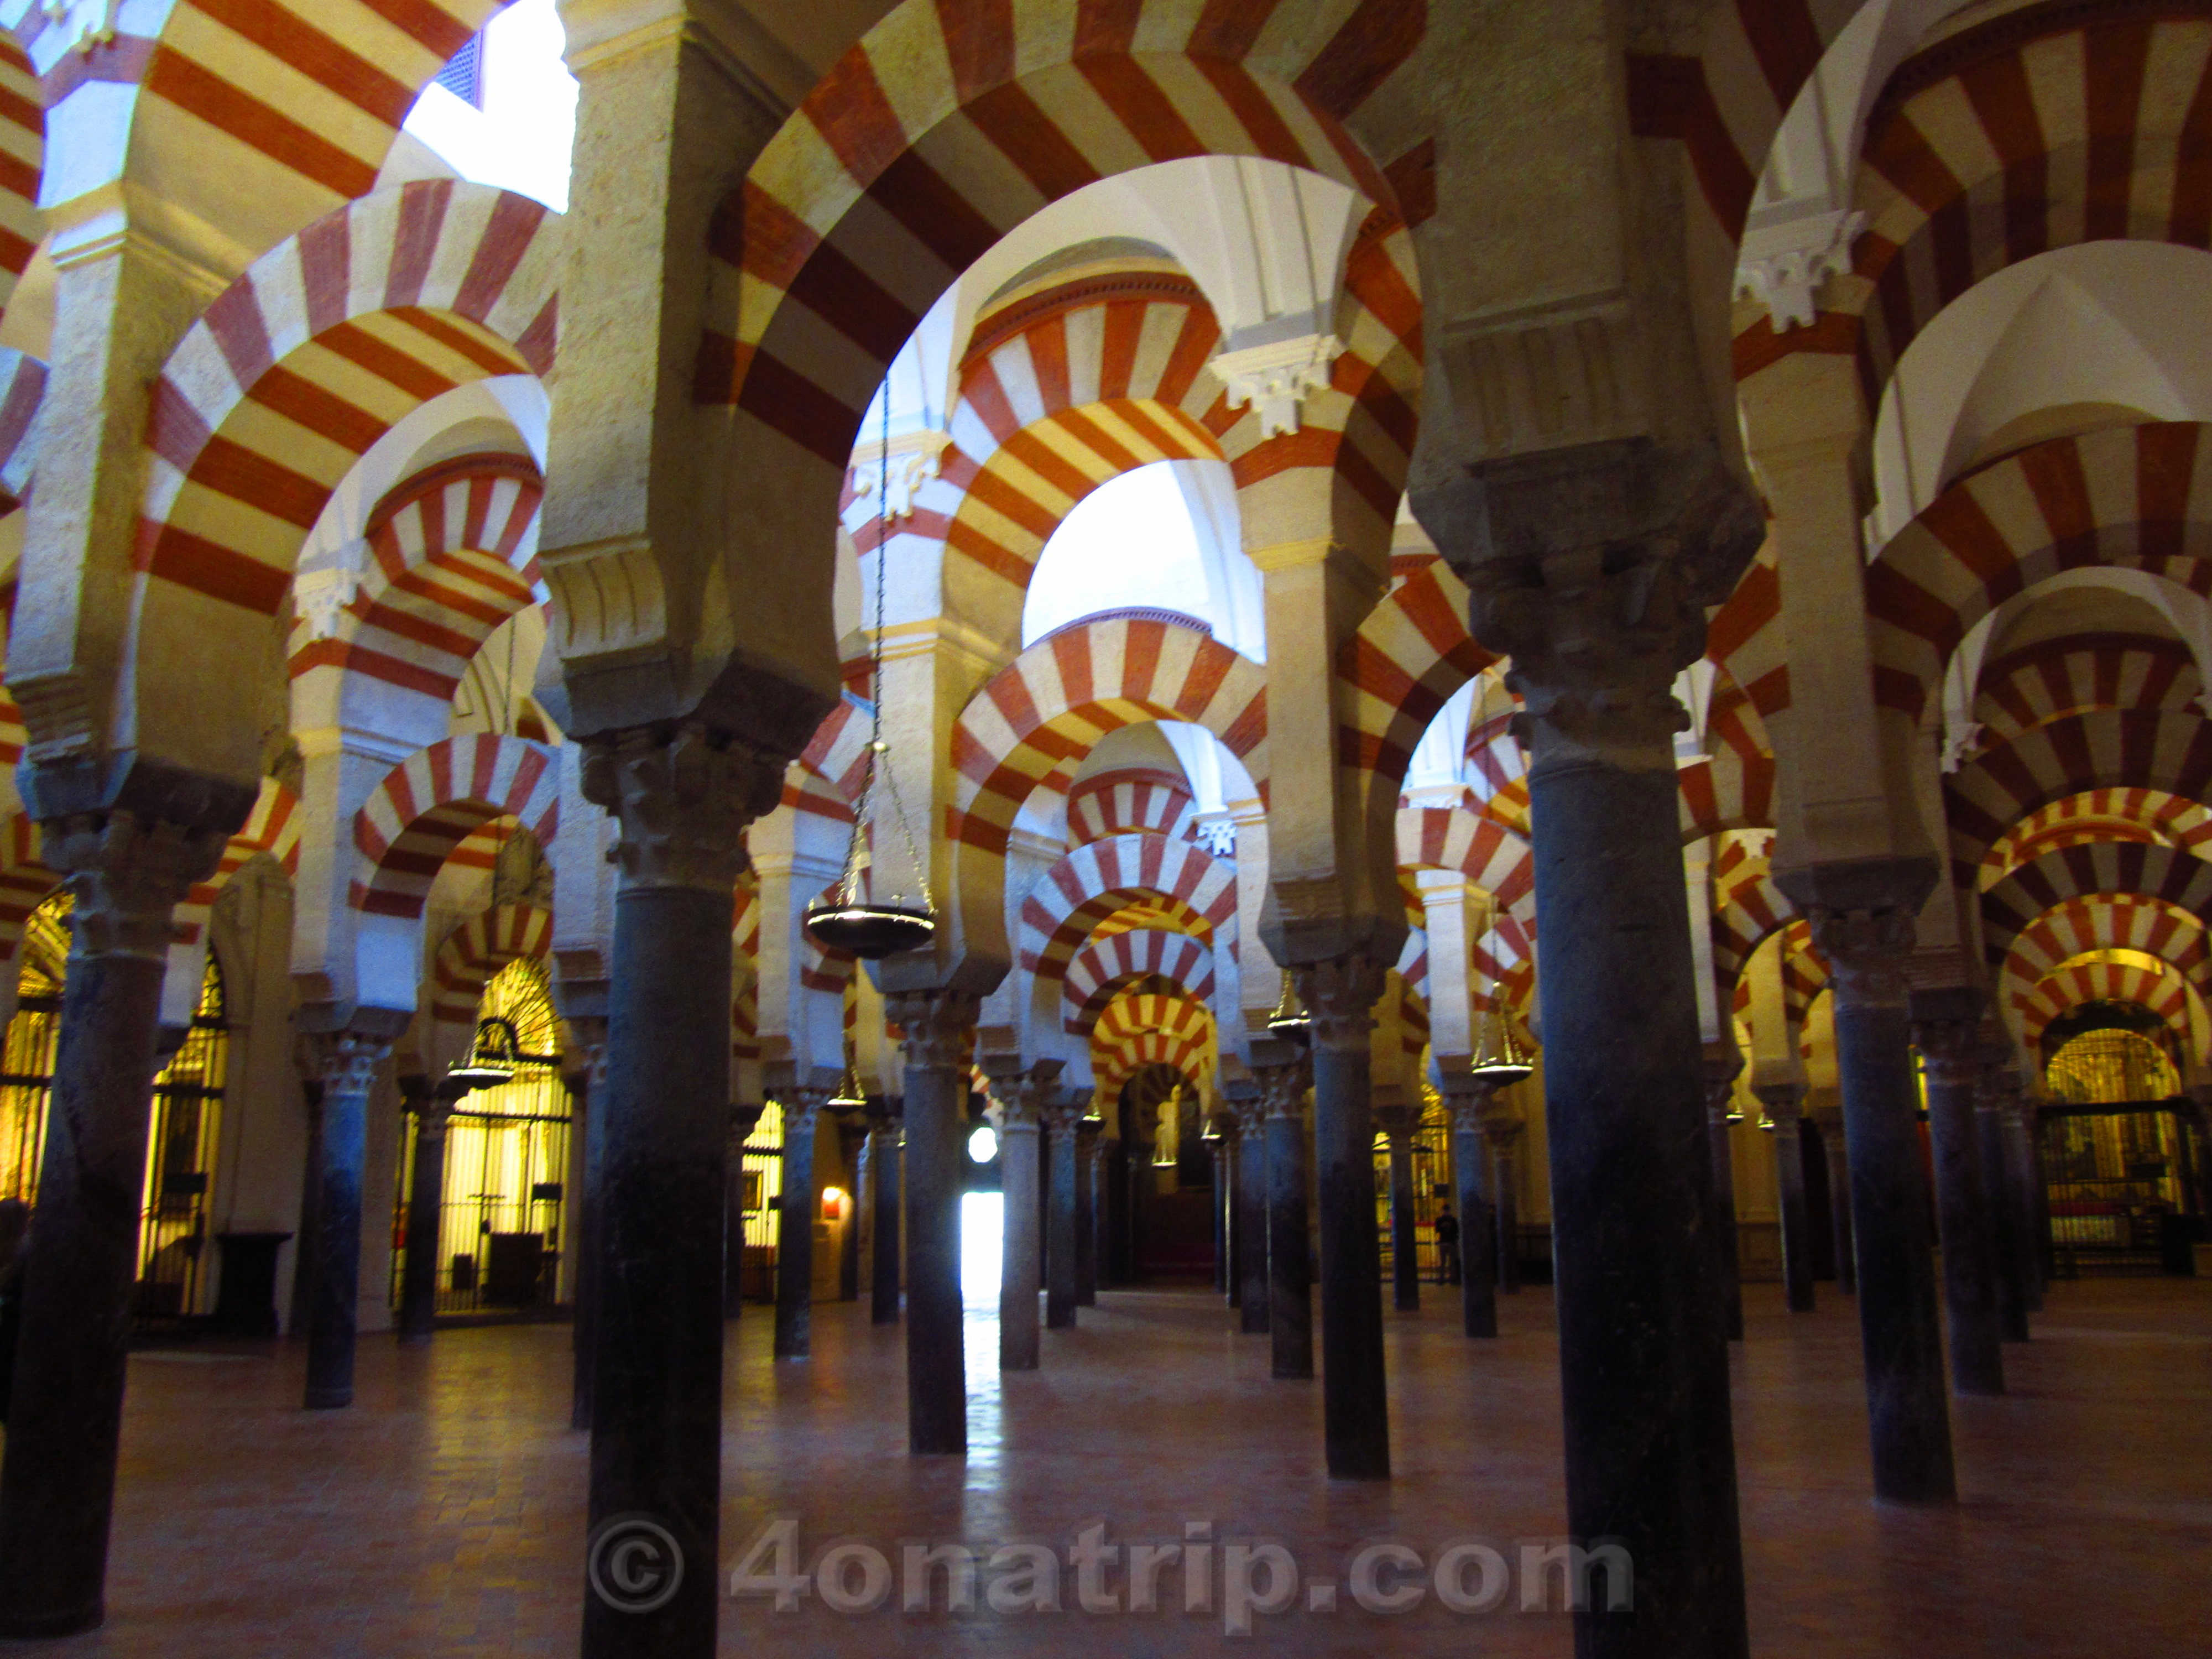 The Mezquita Cathedral in Cordoba Spain